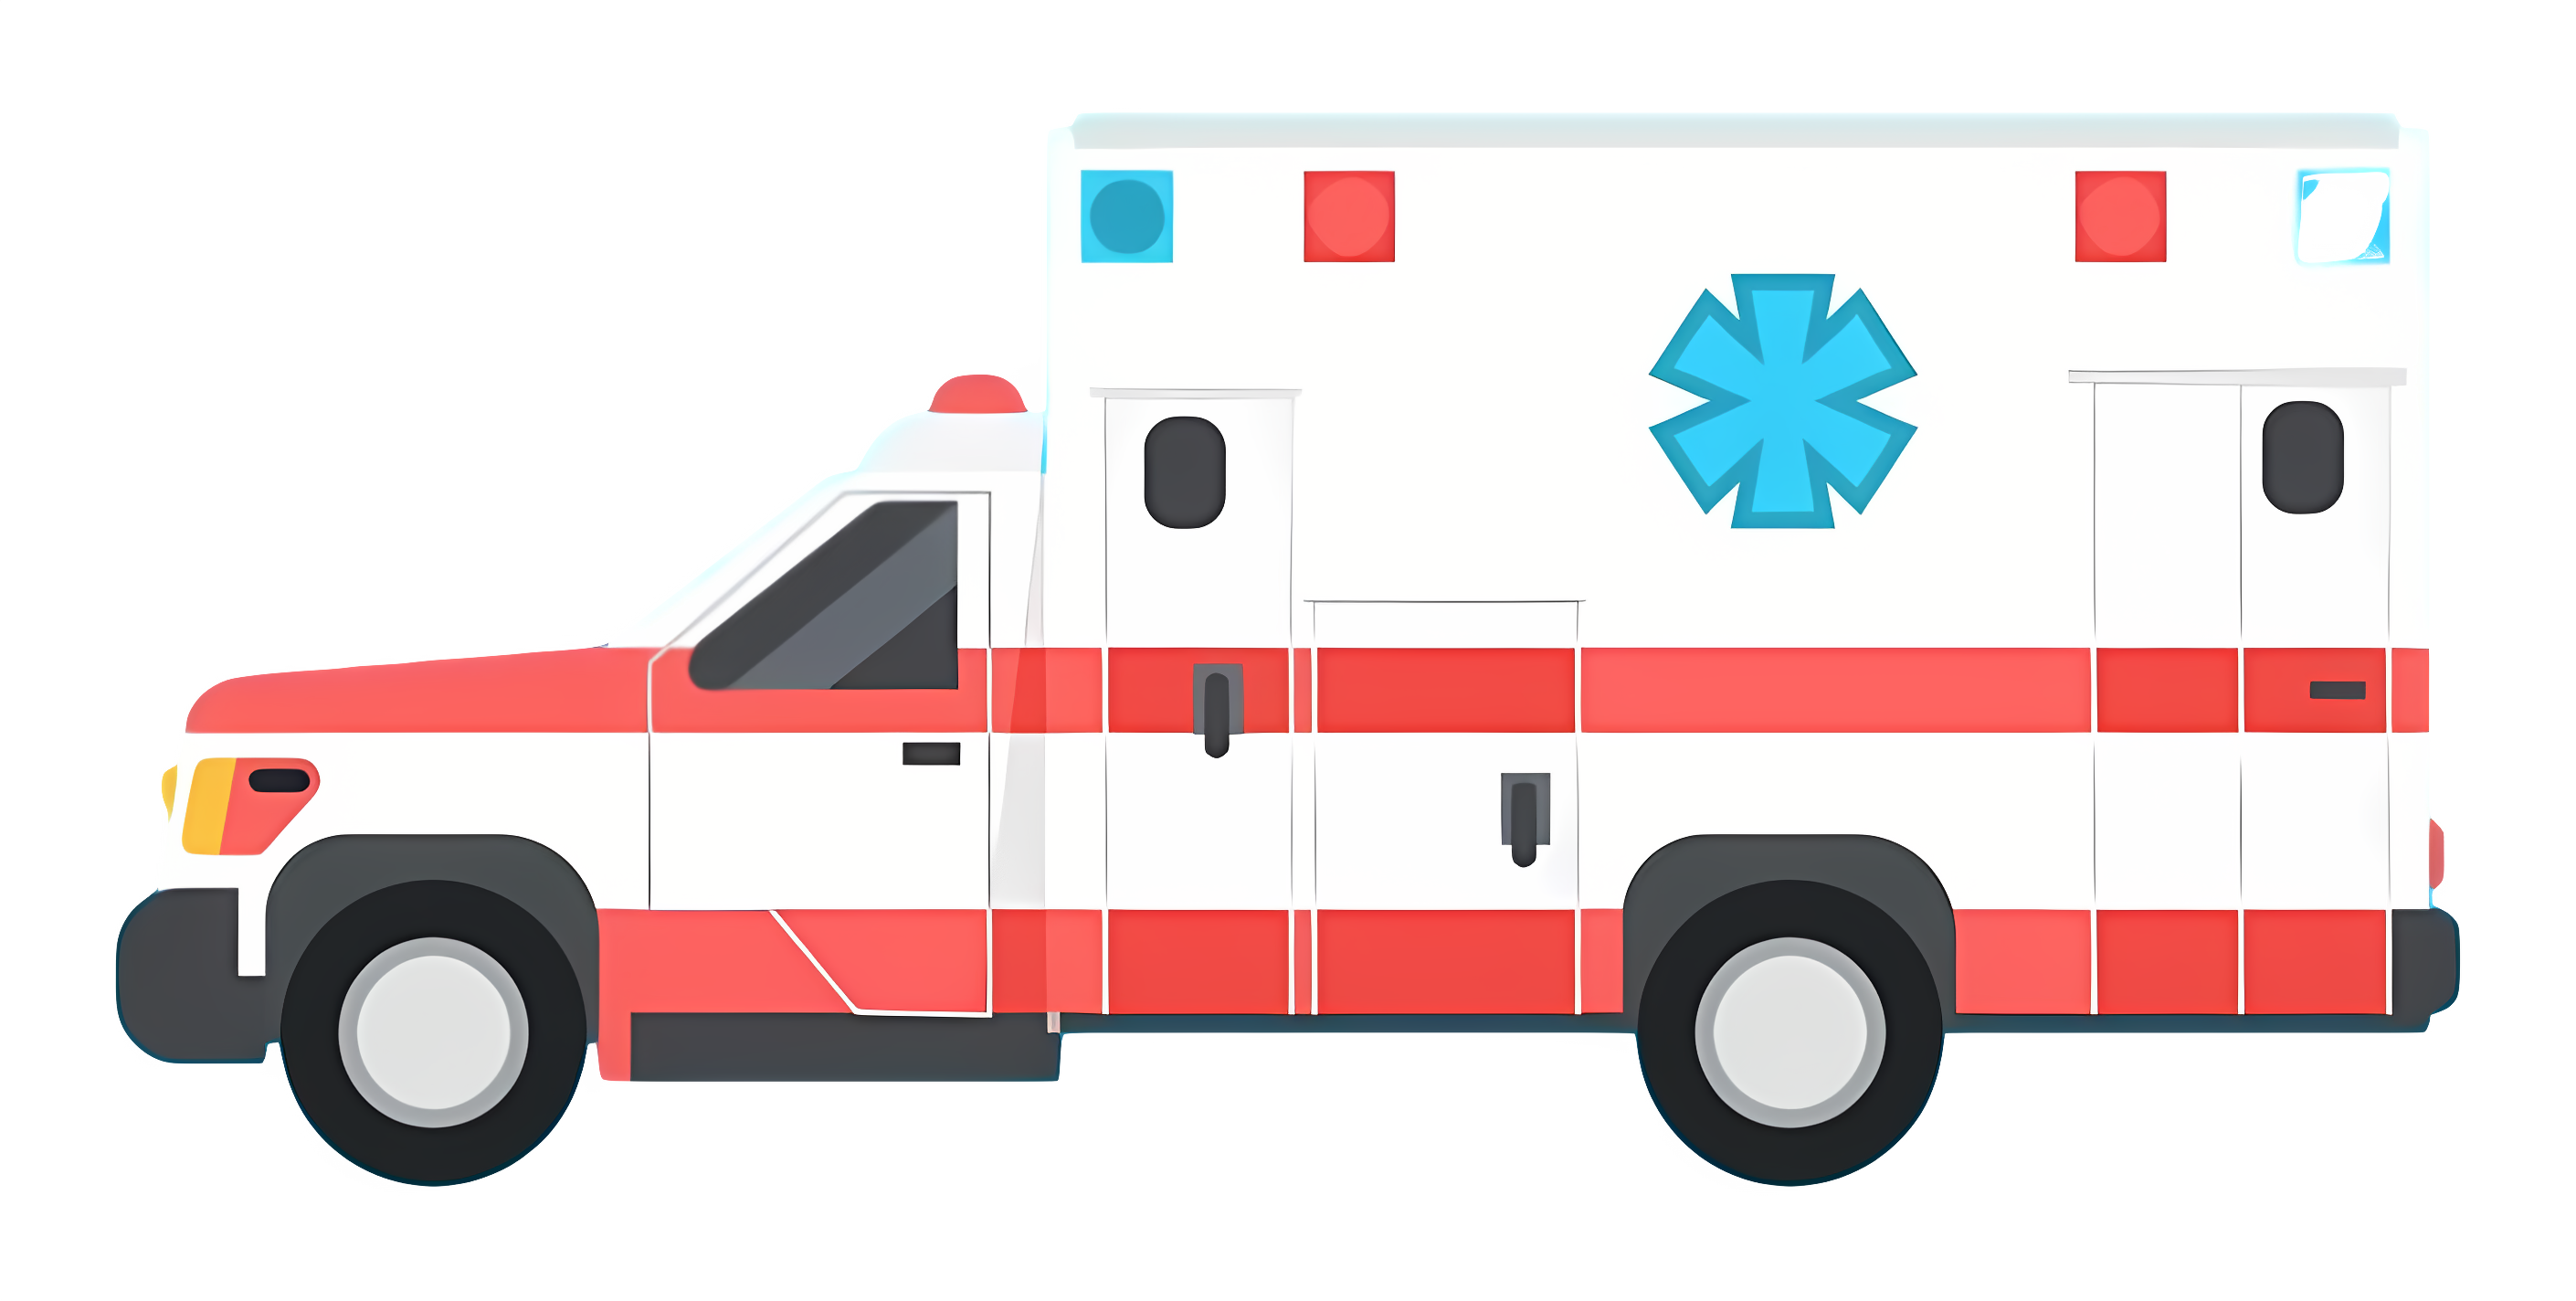 Emergency ambulance with siren, lights, and cross symbol Clipart